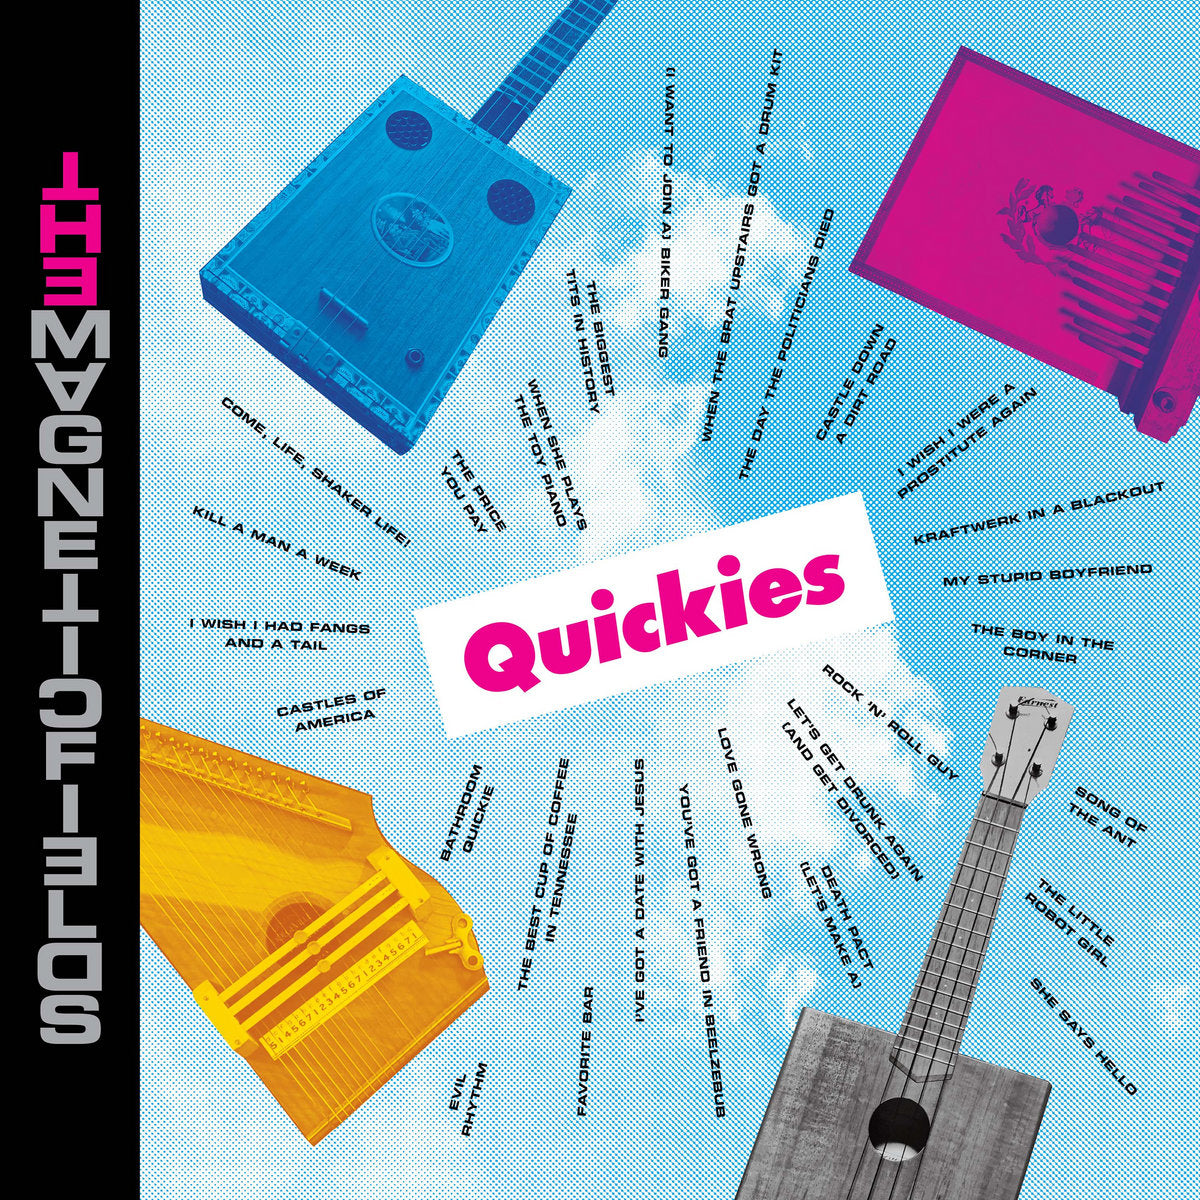 Magnetic Fields, The "Quickies" RSD Magenta (2020)